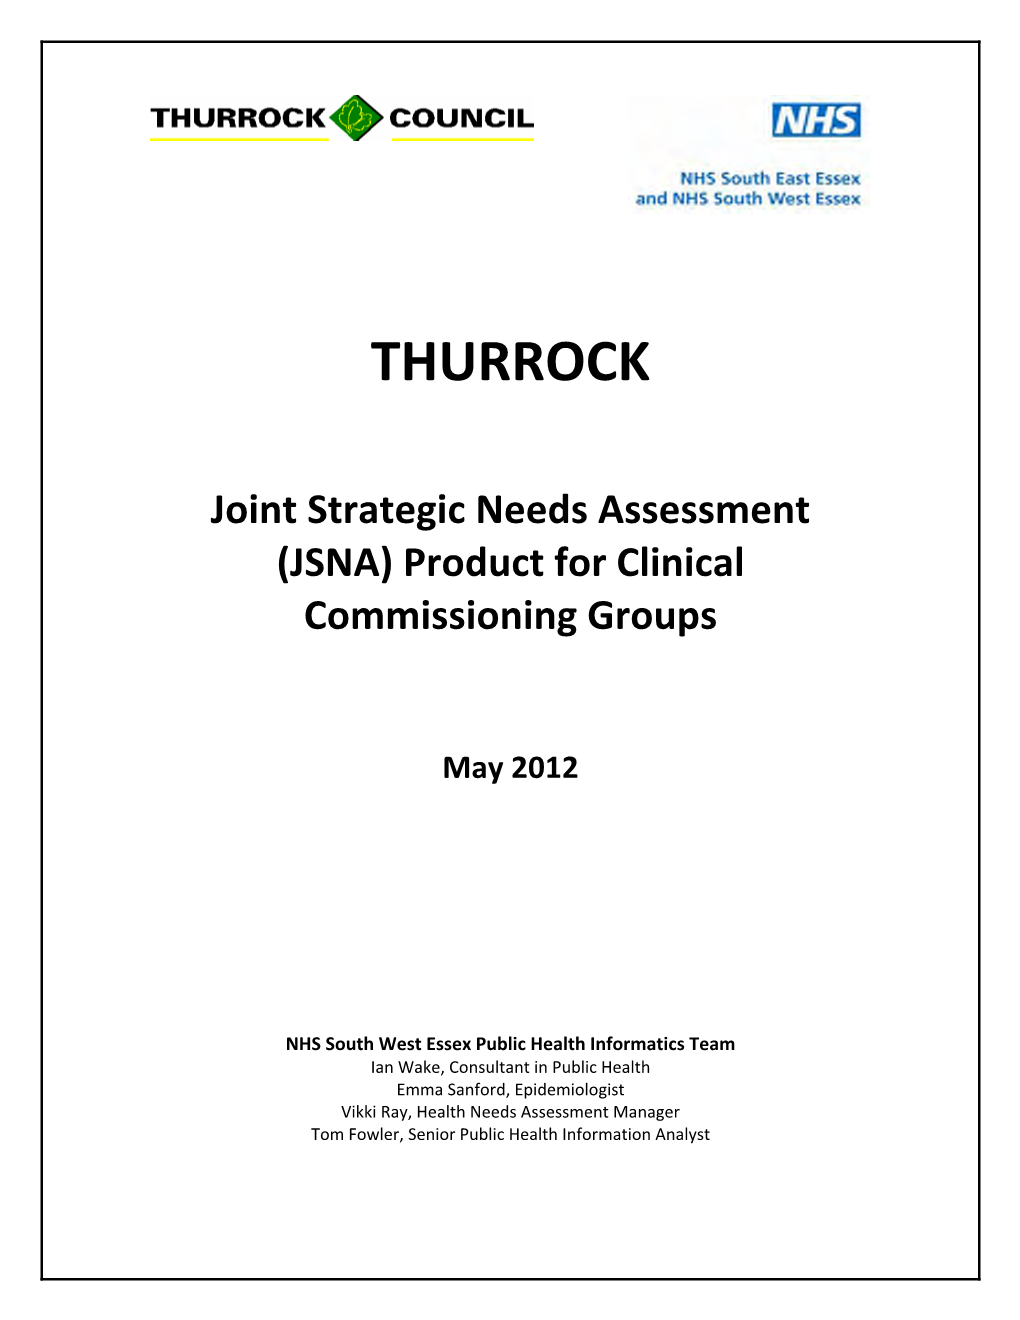 JSNA) Product for Clinical Commissioning Groups